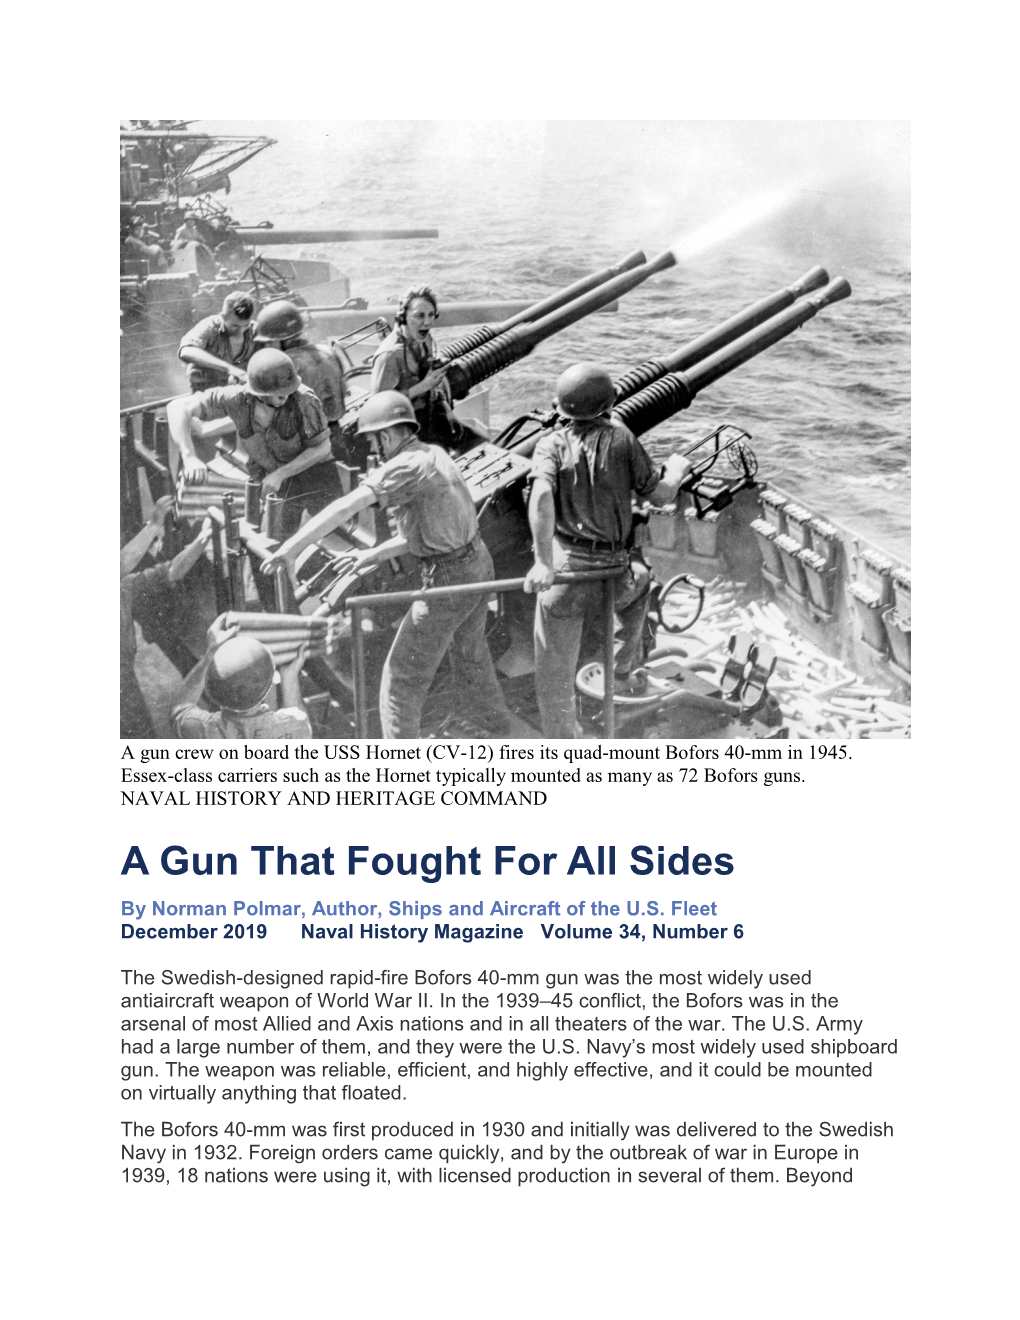 A Gun That Fought for All Sides by Norman Polmar, Author, Ships and Aircraft of the U.S